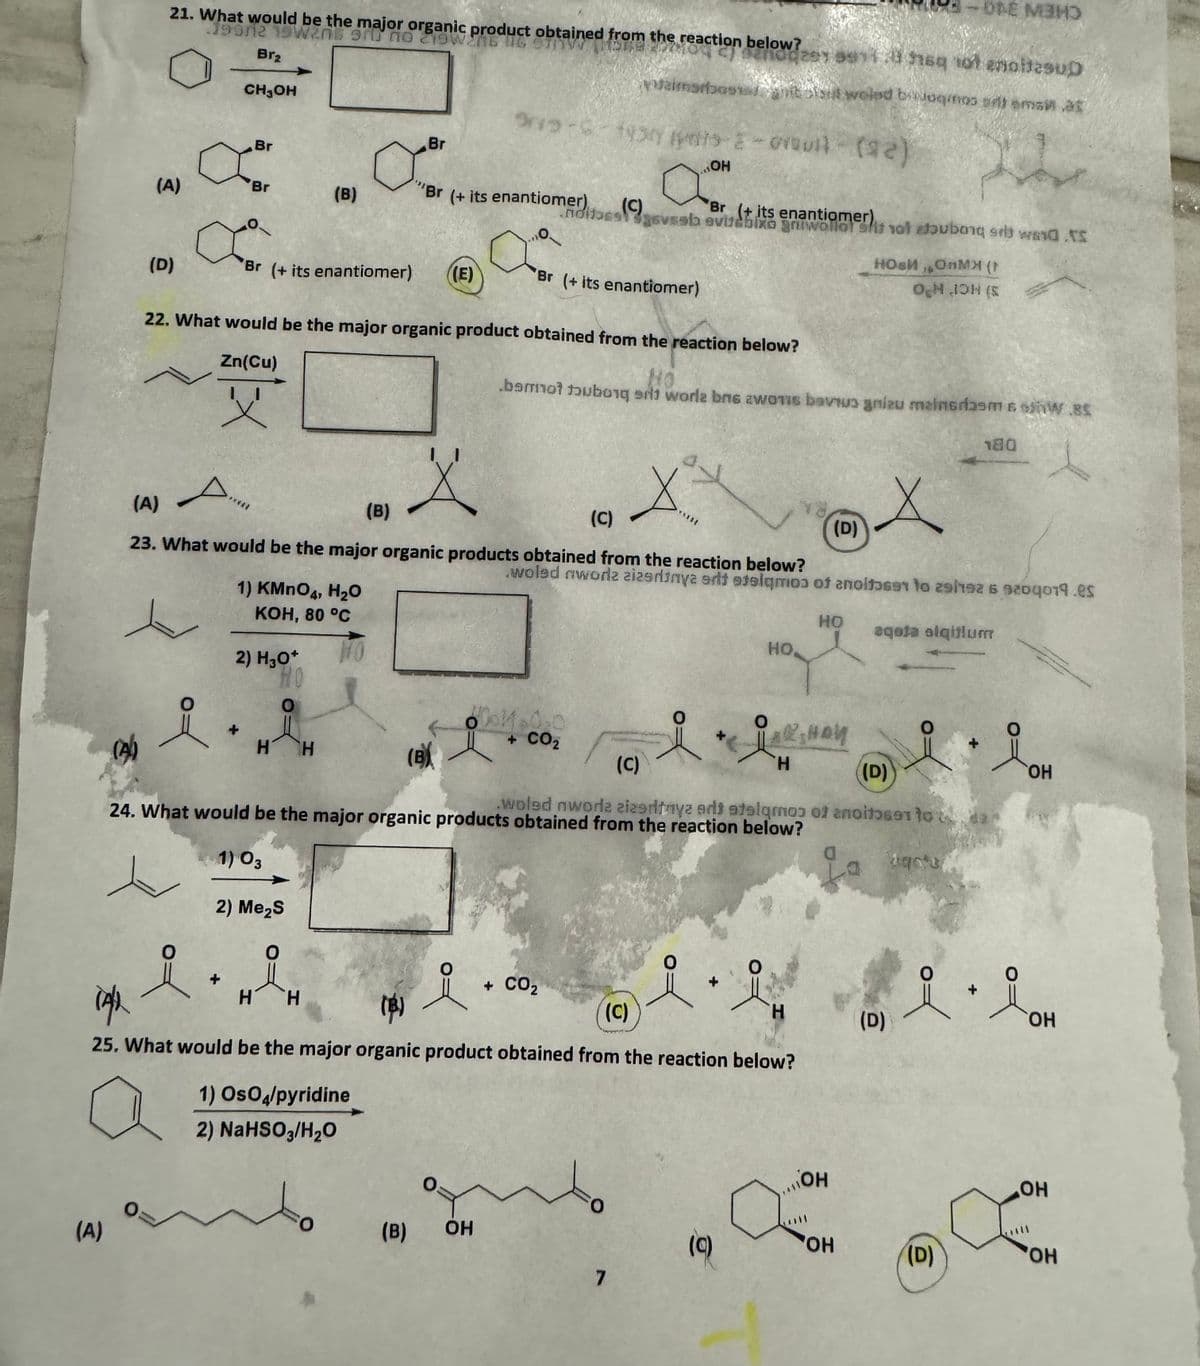 21. What would be the major organic product obtained from the reaction below?
190112 19W205 910 no 219W2NB NG
Br₂
CH3OH
(A)
Br
x"
Br
-ONE MAN
nodzy 9914 sq sot enoitesup
aimsrbosibl weled bagmos sutama at
915-6-1937 079 - (92)
Br
(B)
"Br (+ its enantiomer)
(C)
nolds
Q
OH
Br (+ its enantiomer)
geveeb evitabixo grwallot shit not bubong swad.t
8
(D)
Br (+ its enantiomer)
((E)
Br (+ its enantiomer)
НОВИ ОМЯ (
OH OH (s
22. What would be the major organic product obtained from the reaction below?
No
bamot tubong s] worle bne awonis bavi gniau mainsrasm 6.85
Zn(Cu)
父
A
(A)
(B)
(C)
(D)
180
23. What would be the major organic products obtained from the reaction below?
woled aworlz zizsritnya artt staigmos of anoitose to 29/92 6 9204019.es
1) KMnO4, H₂O
KOH, 80 °C
2) H3O+
HO
(A)
요아
HH
+ CO₂
(B)
(c)
HO
aqola alqitlum
HO
LARS HOW
H
(D)
24. What would be the major organic products obtained from the reaction below?
.woled nwore zizantnya ads atelqmoɔ of anoito691 to 2
1) 03
2) Me₂S
O
14/2
H
H
(B)
요
+ CO₂
(c)
OH
HO
H
요
0
(D)
OH
25. What would be the major organic product obtained from the reaction below?
1) OsO4/pyridine
2) NaHSO₂/H₂O
(A)
OH
OH
O
O
(B)
OH
(c)
OH
(D)
OH
HO
7